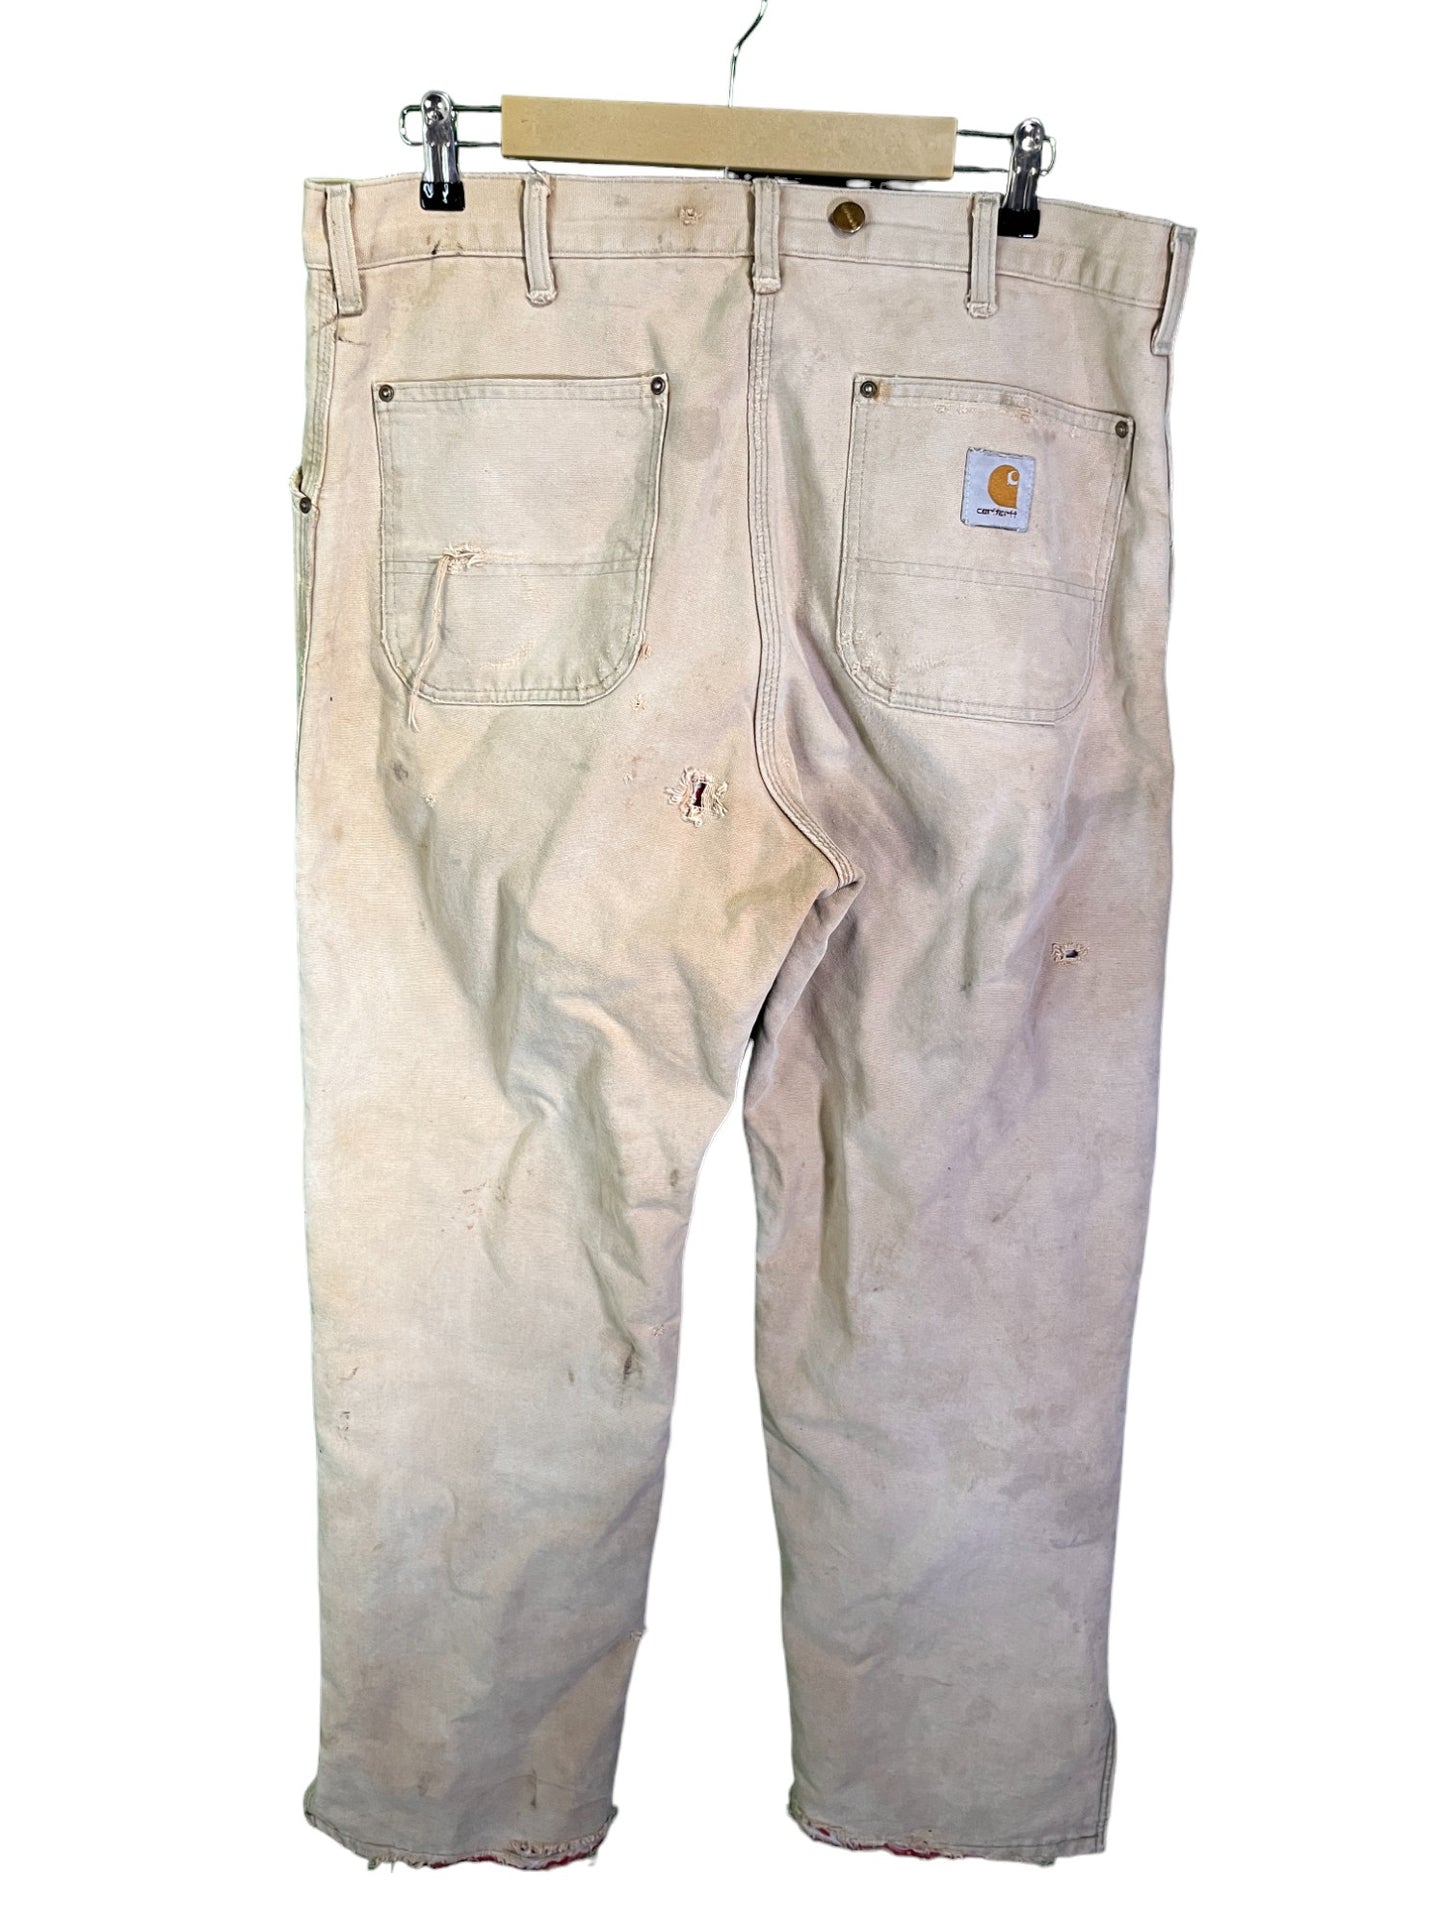 Vintage Carhartt Insulated Distressed Work Pants Size 36x32